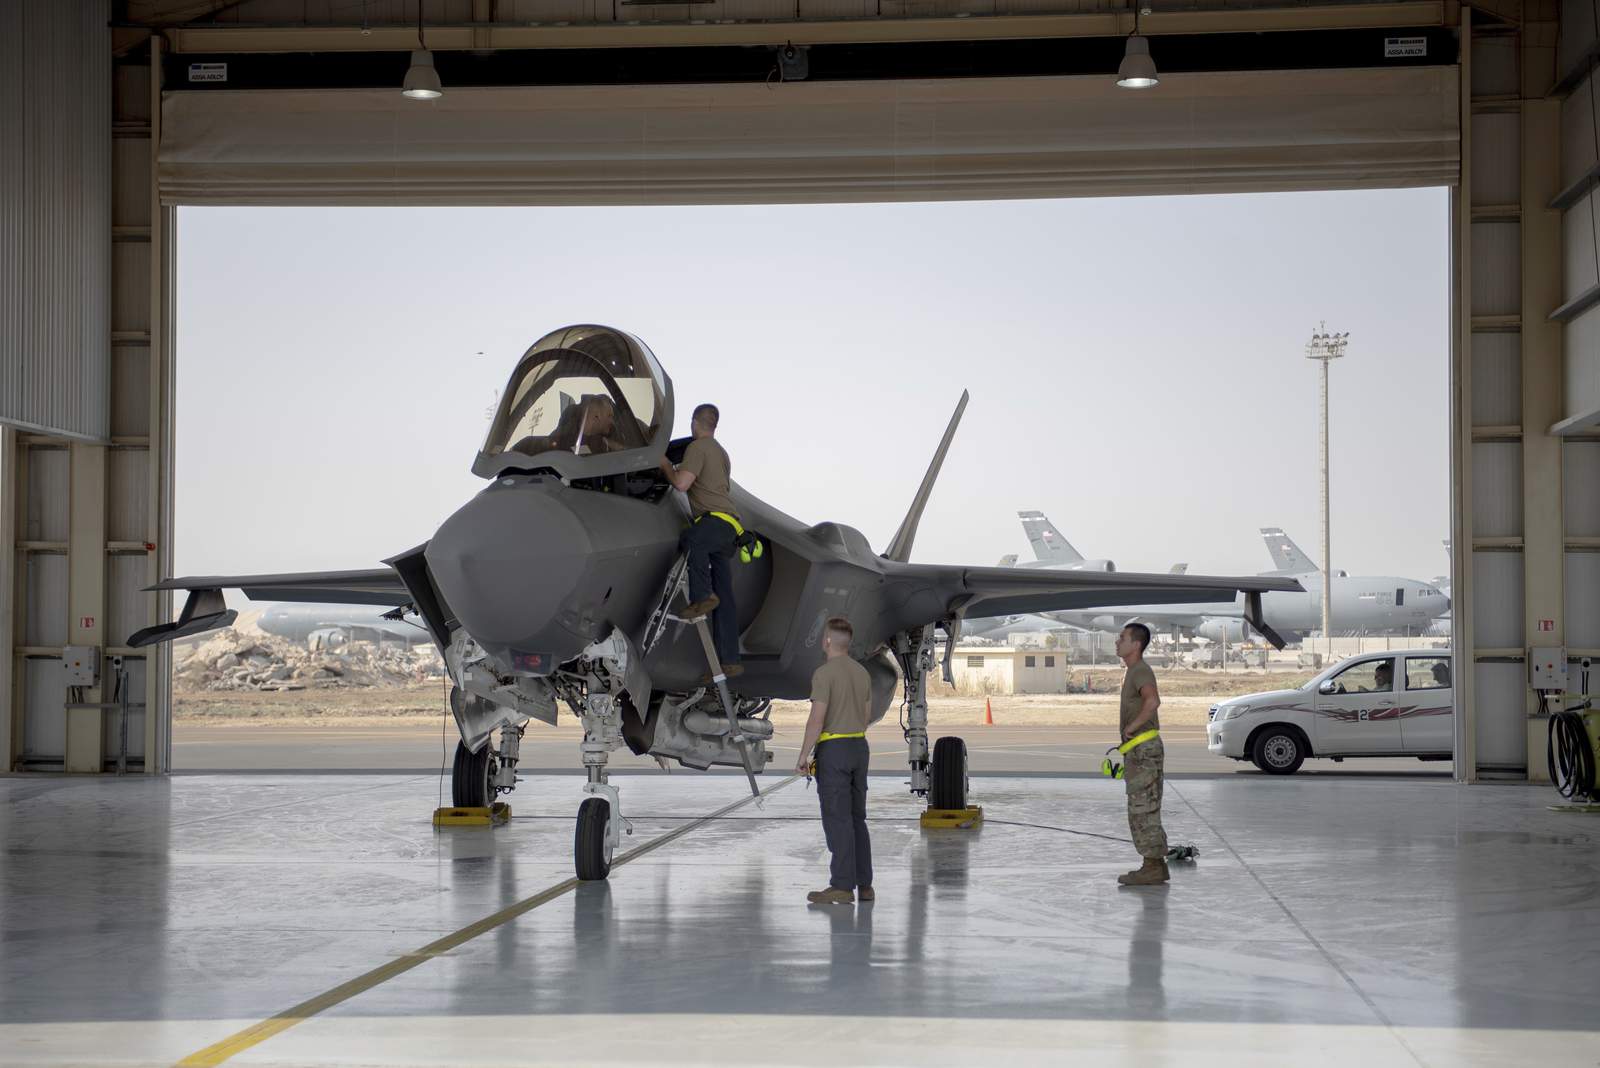 US plans sale of F-35 fighter jets to UAE in $23B arms deal